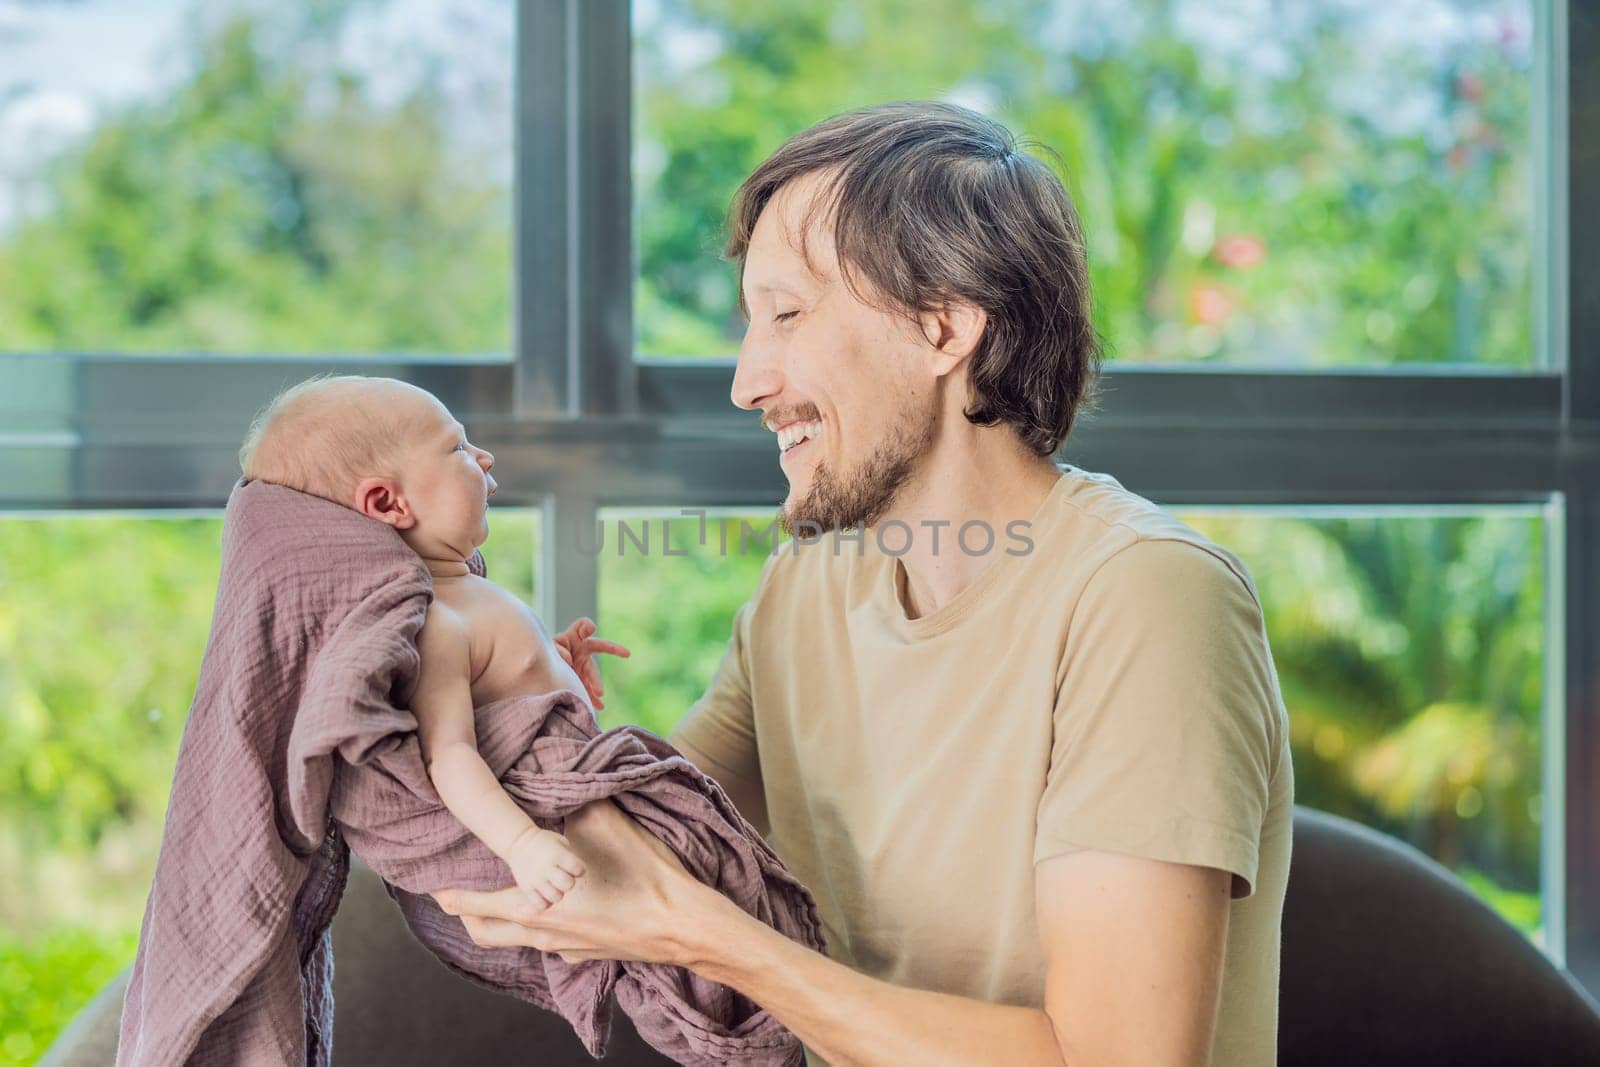 Dad and newborn at home. This tender moment captures the bond between father and child in a loving and comfortable family environment highlighting the joys of parenthood and the warmth of home.